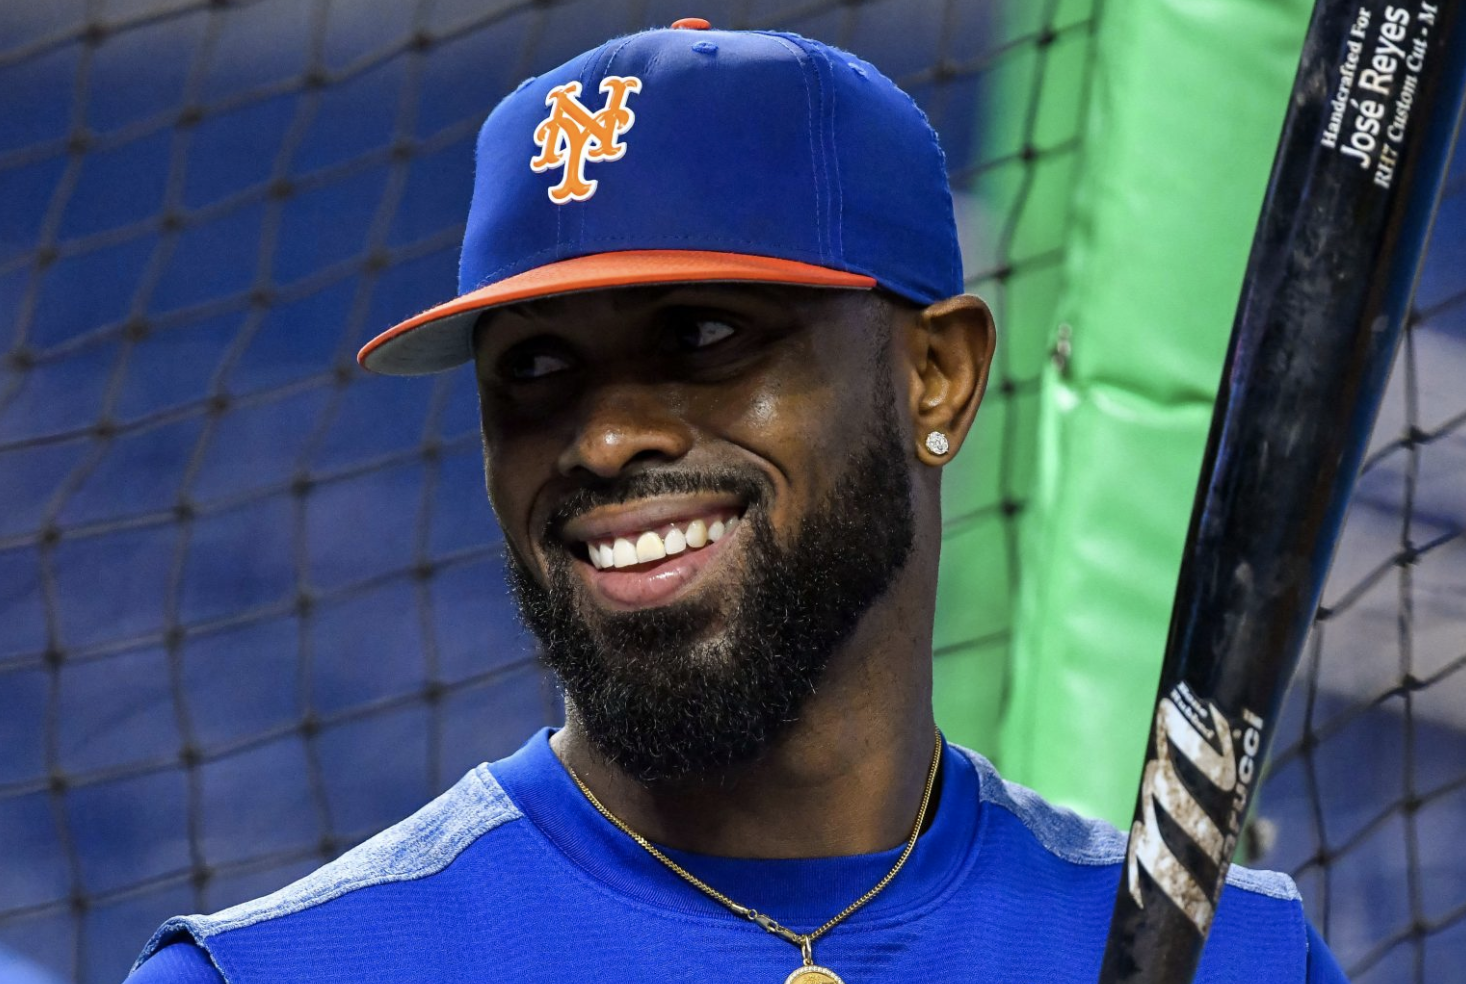 Former fan favorite Jose Reyes returns to the Mets after domestic